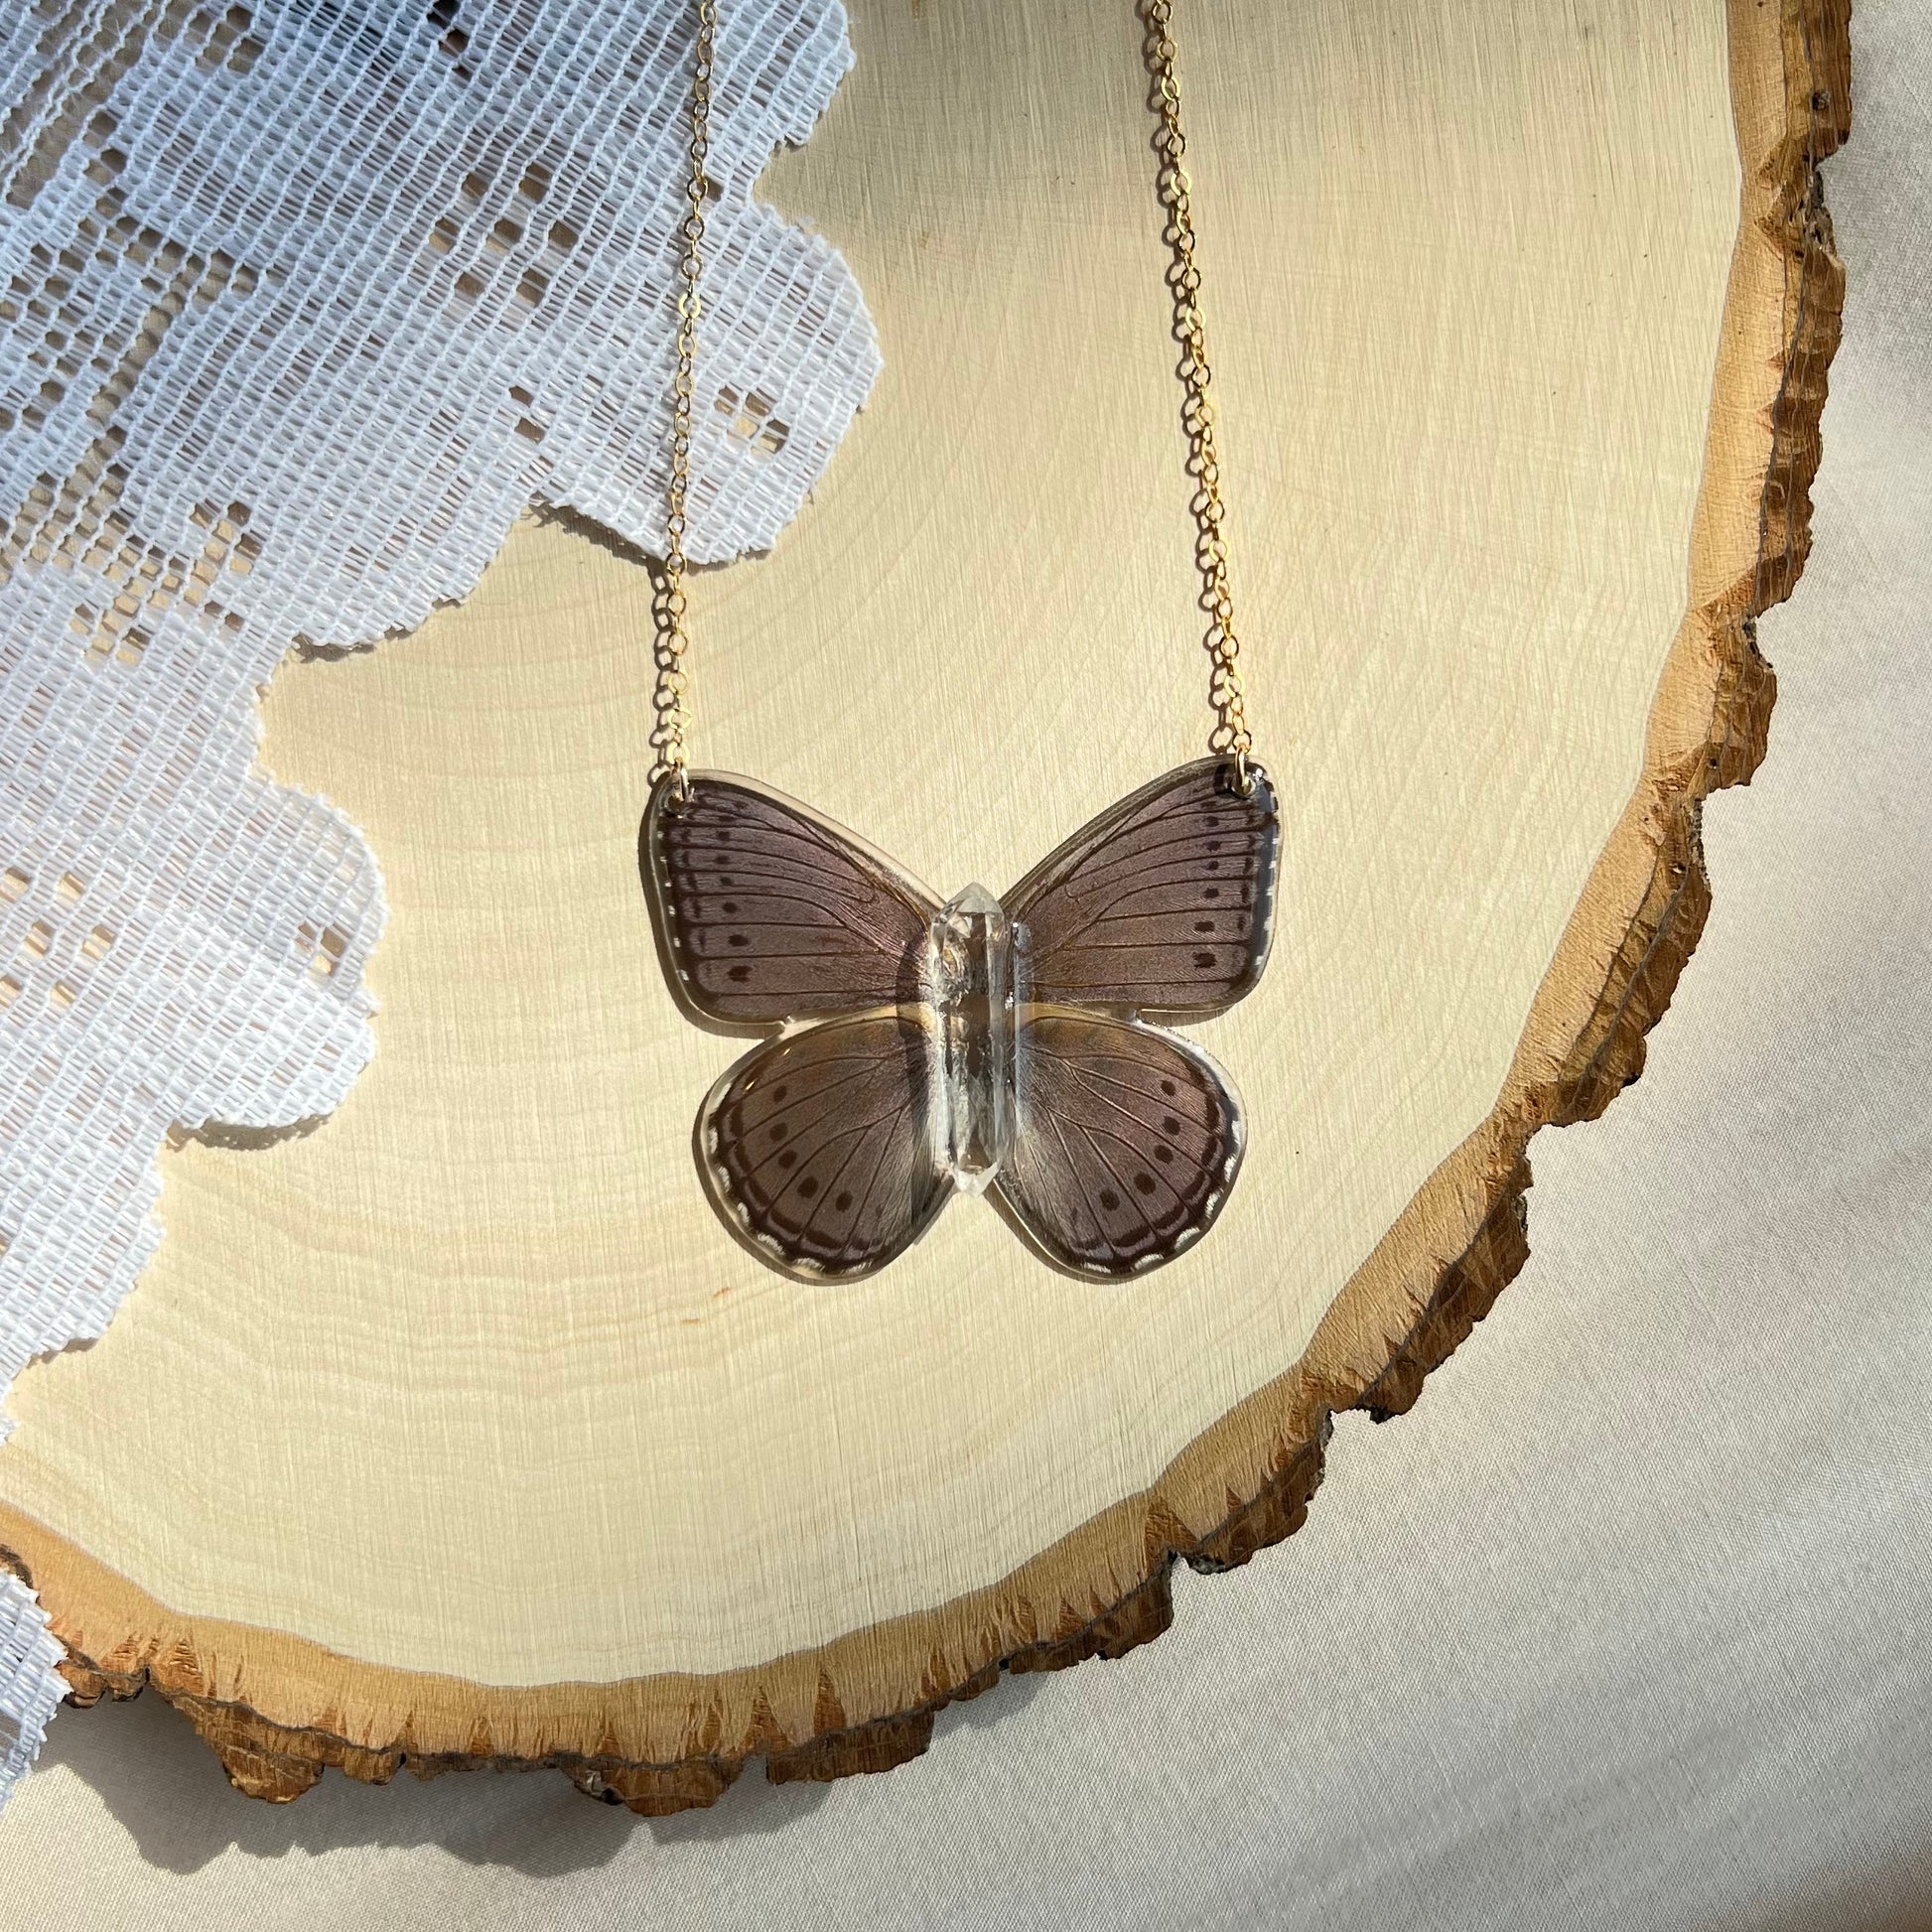 small purple iridescent butterfly necklace with gold chain laying on wooden board